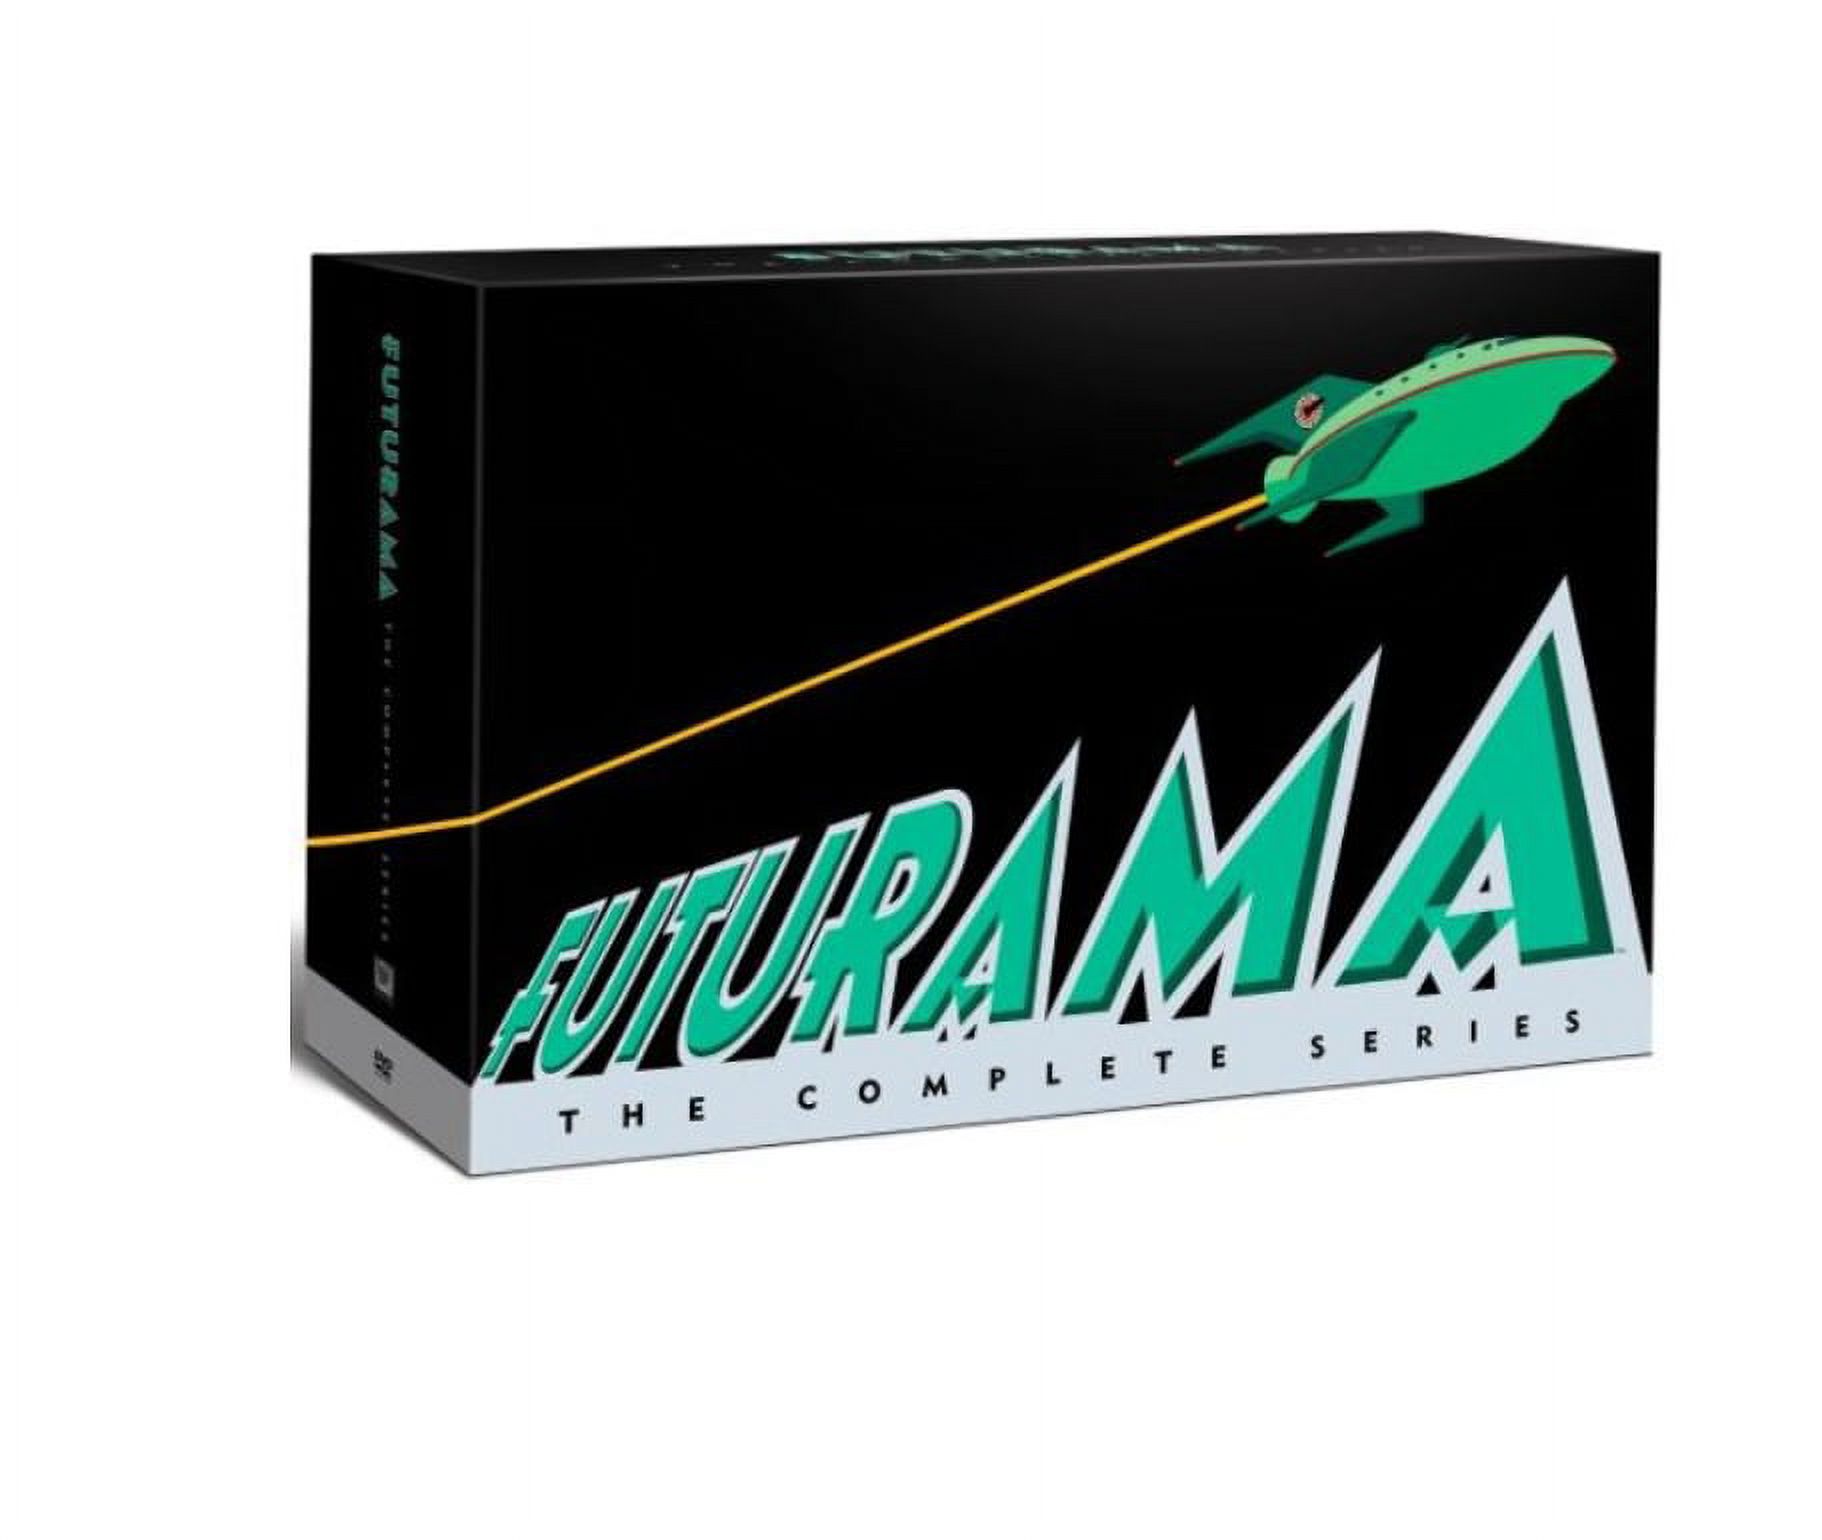 Futurama: The Complete Series (DVD) - image 2 of 2